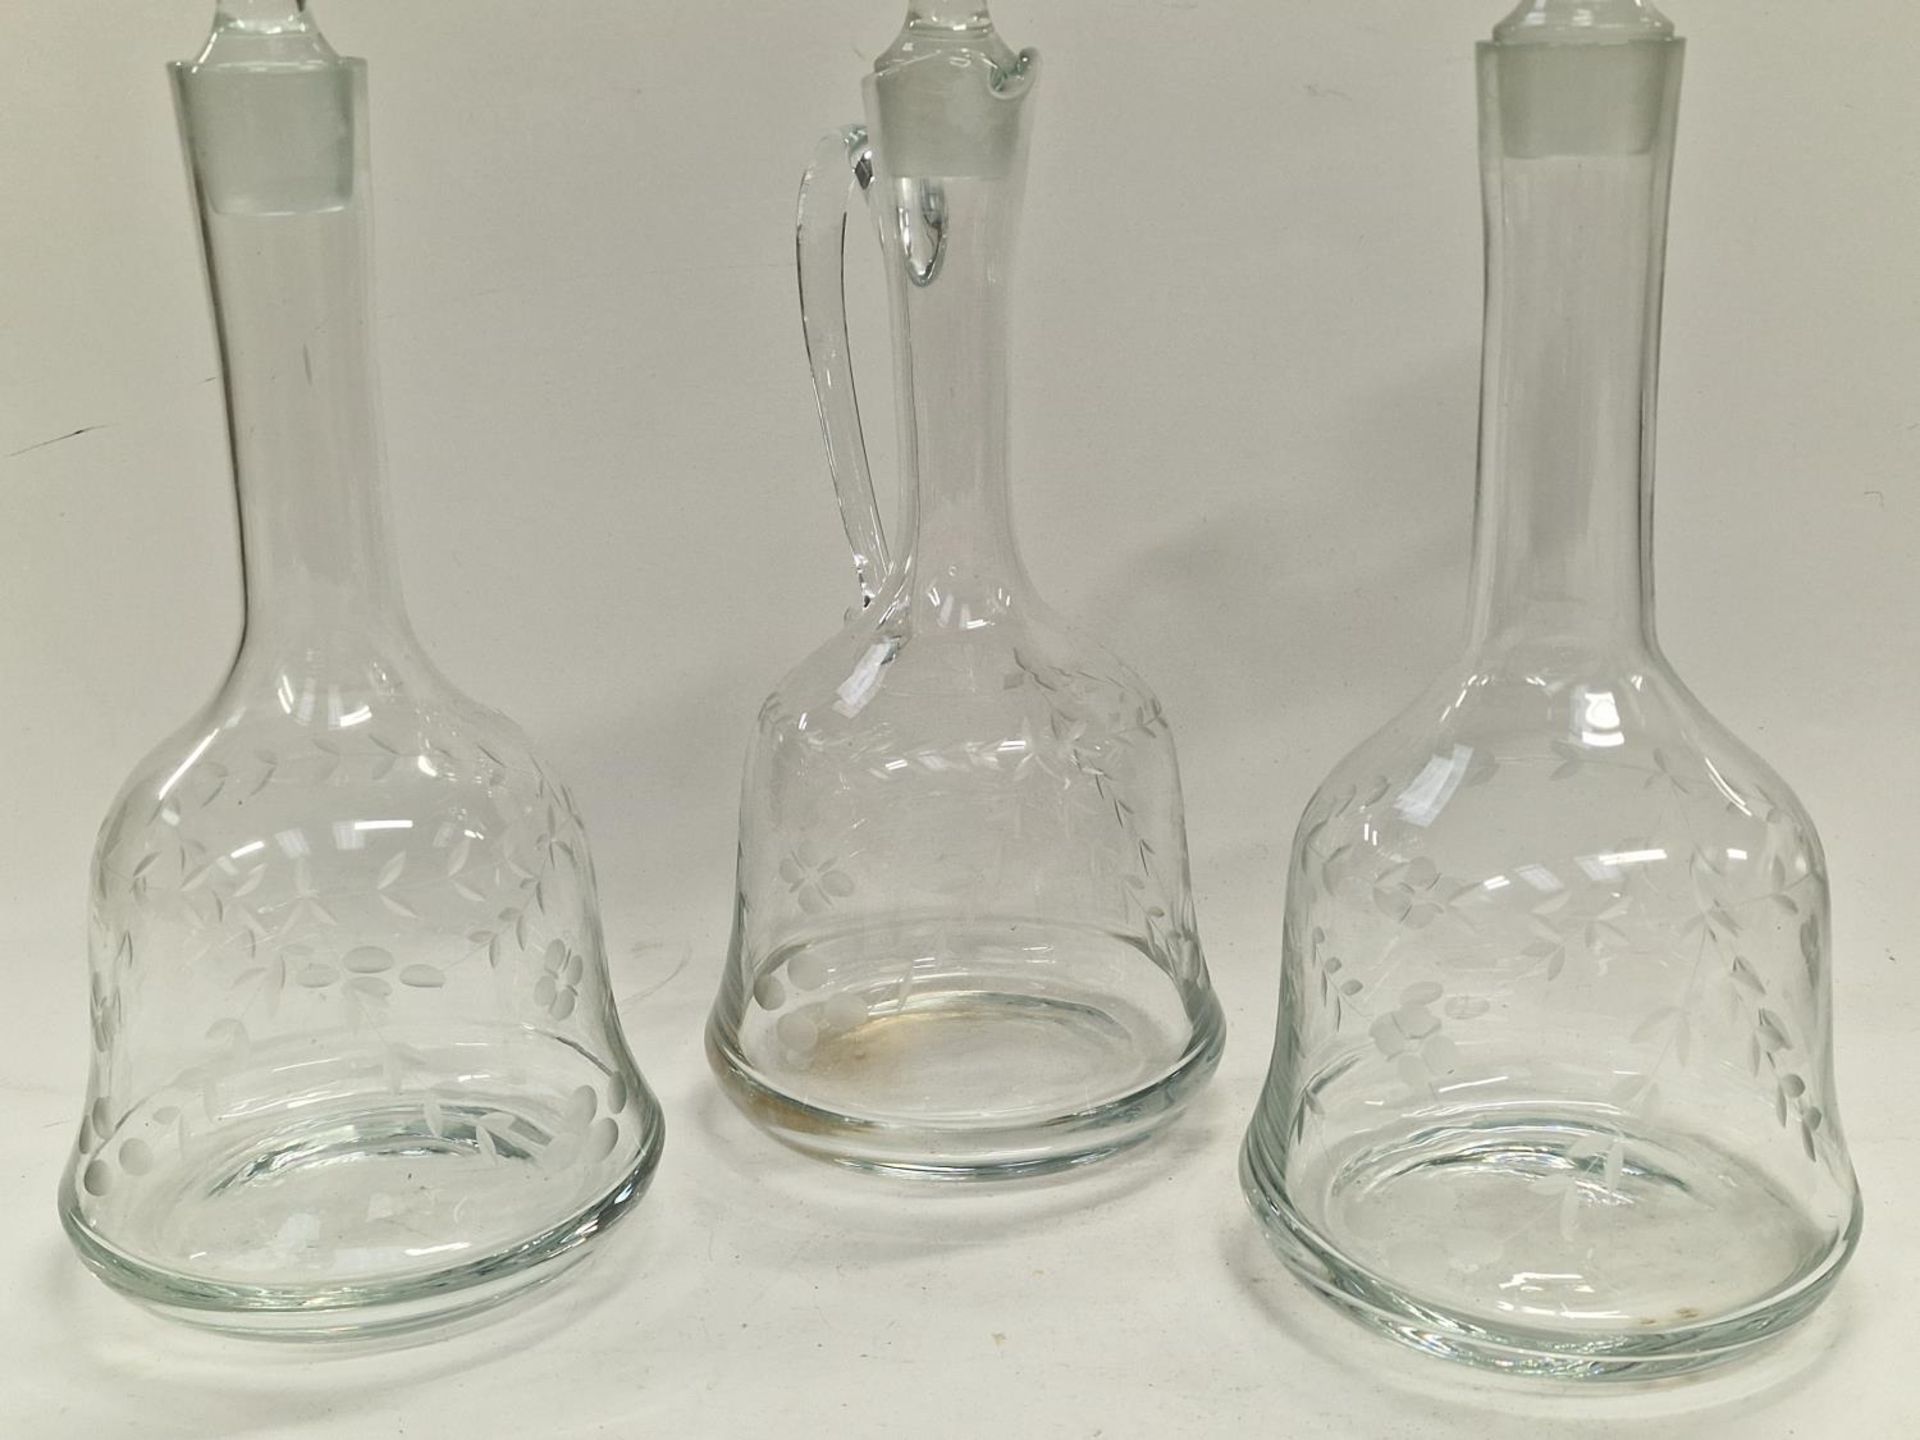 Three etched glass decanters with stoppers. - Image 3 of 3